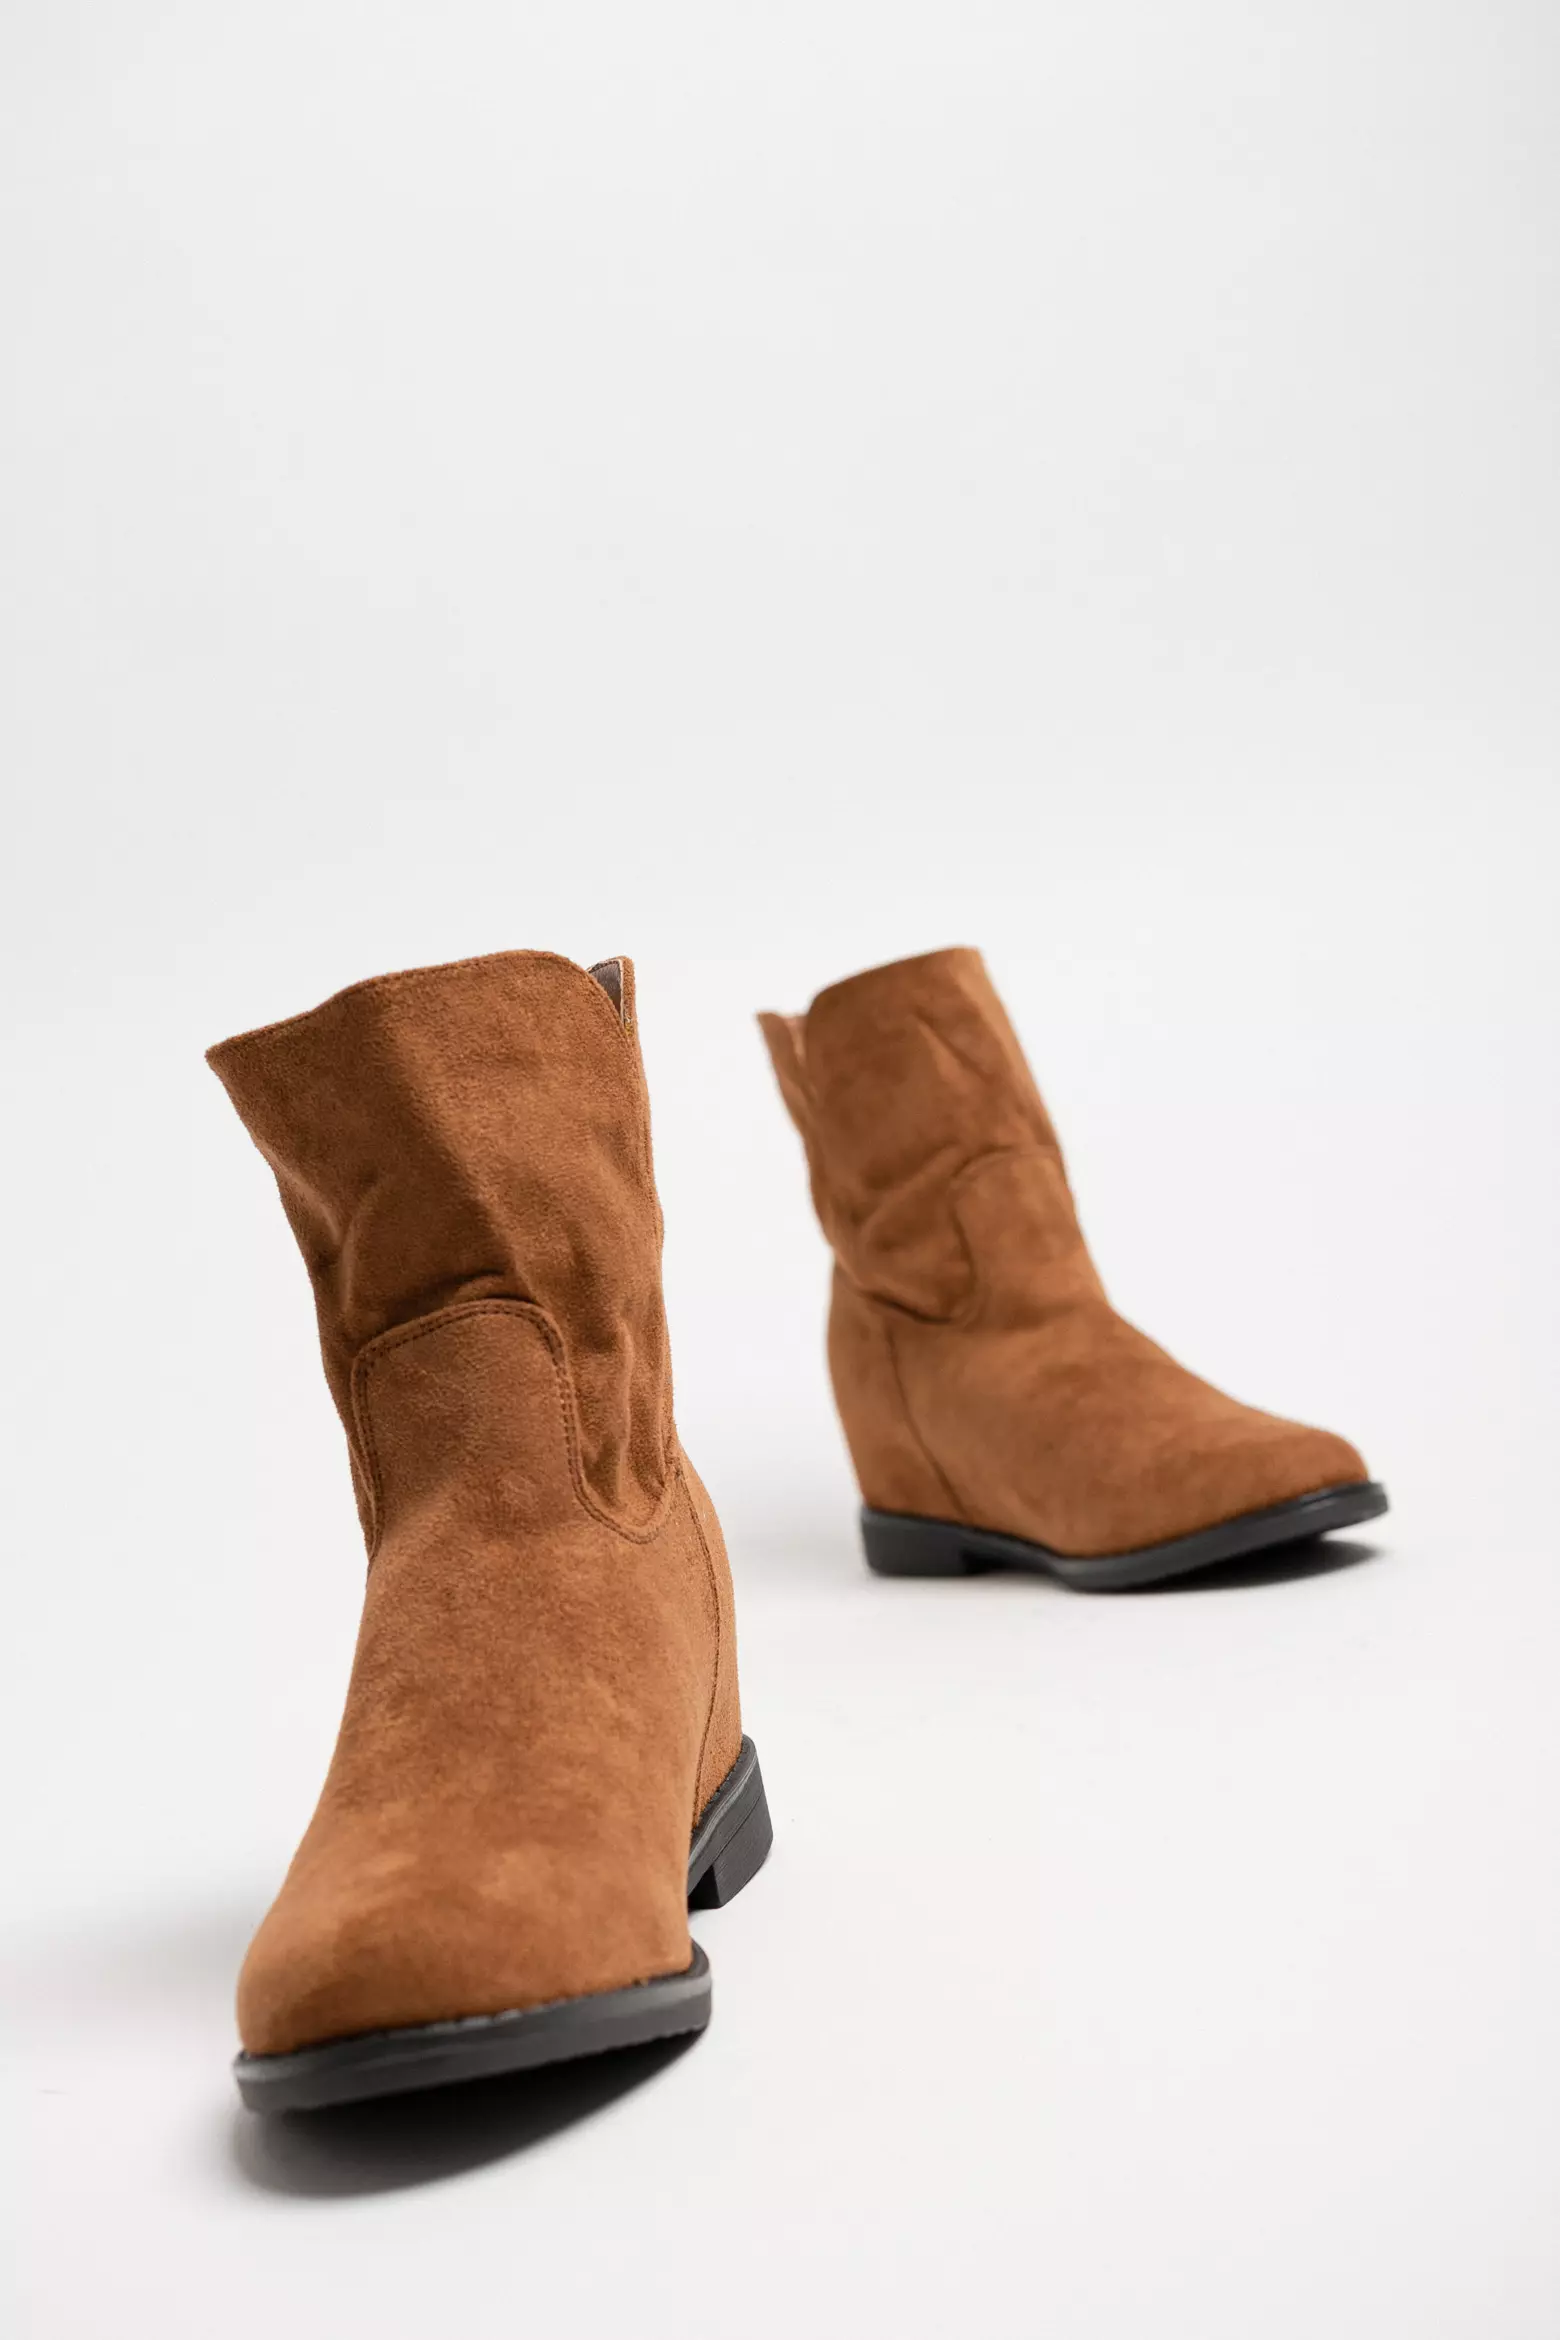 CAMPERE BOOTS - CAMEL